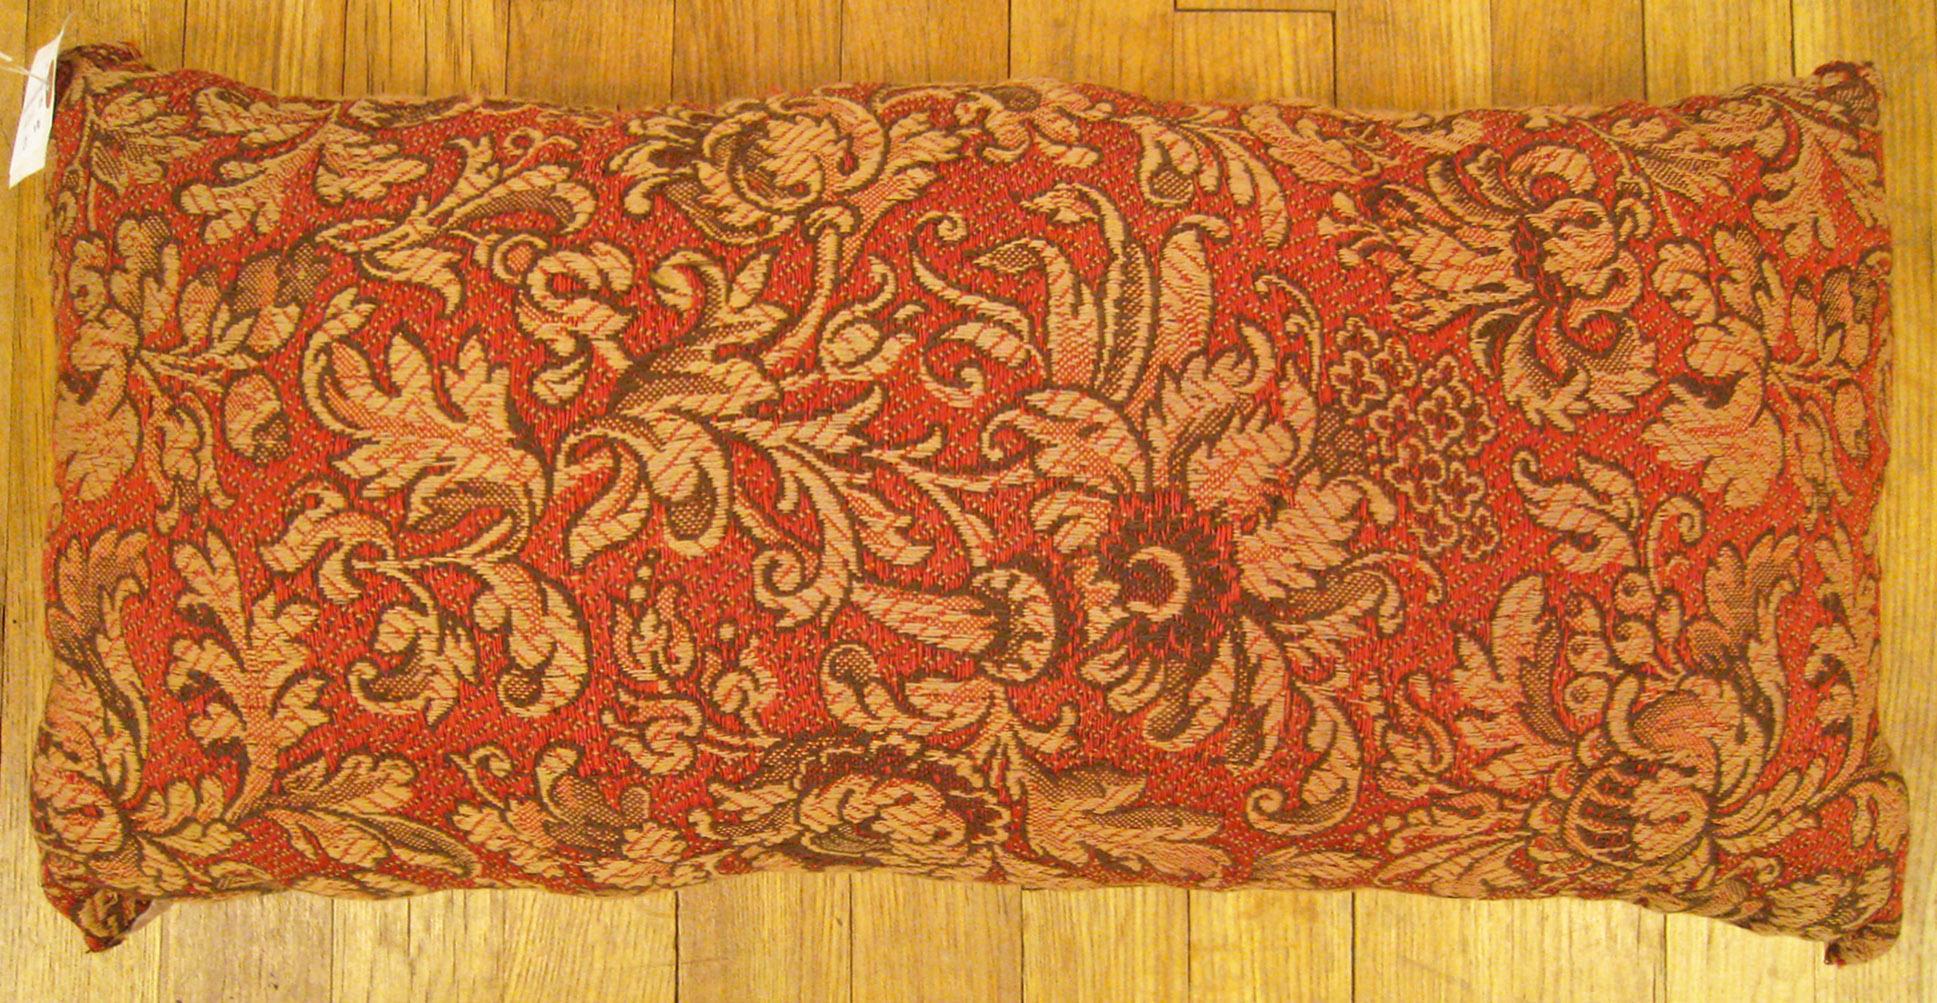 Antique Jacquard Tapestry Pillow; size 1'0” x 2'0”. 

An antique decorative pillow with floral elements allover a soft red central field, size 1'0